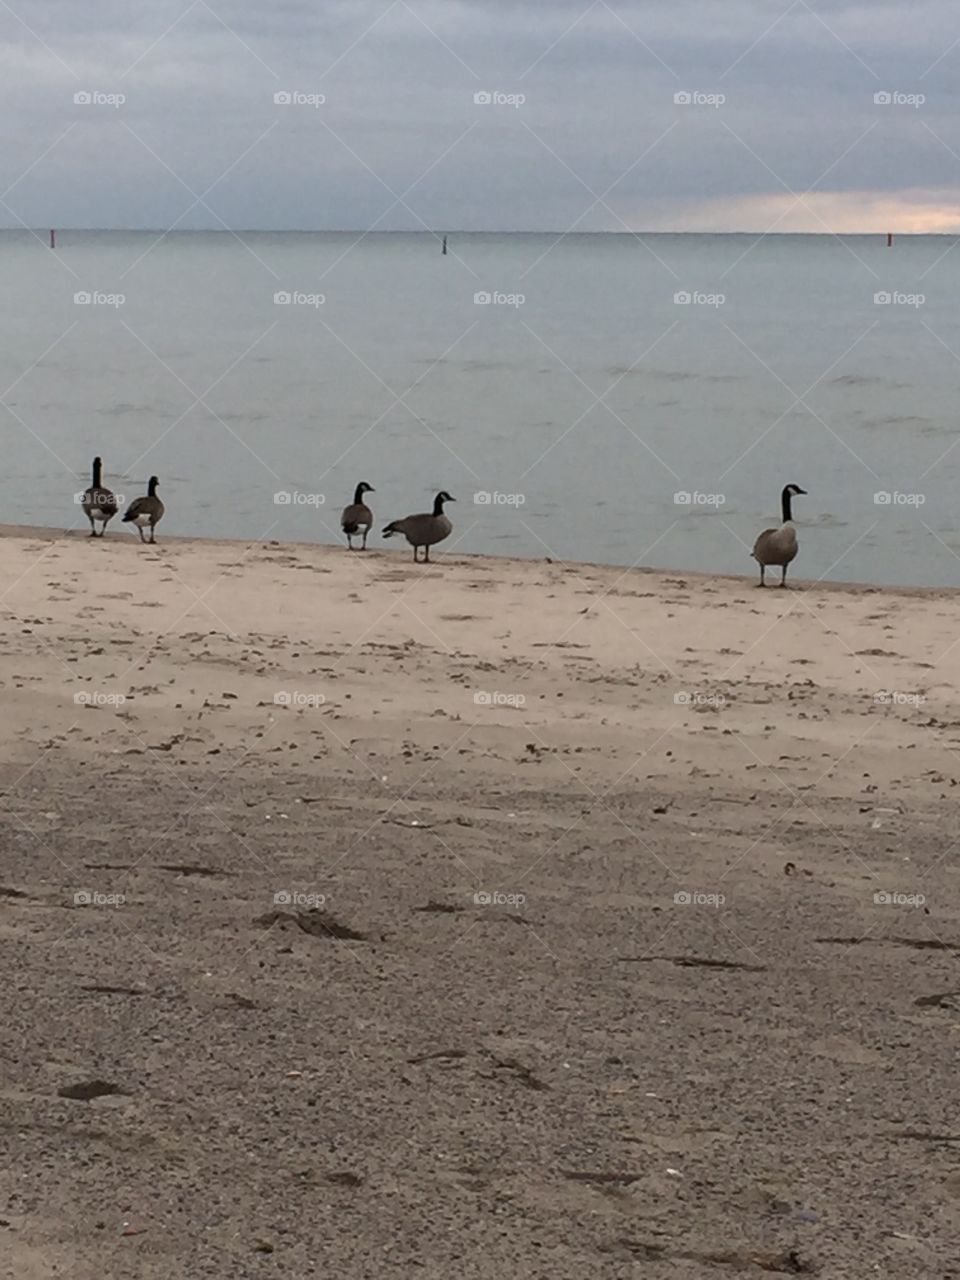 Canadian geese spending the winter in Oshawa, Ontario. 